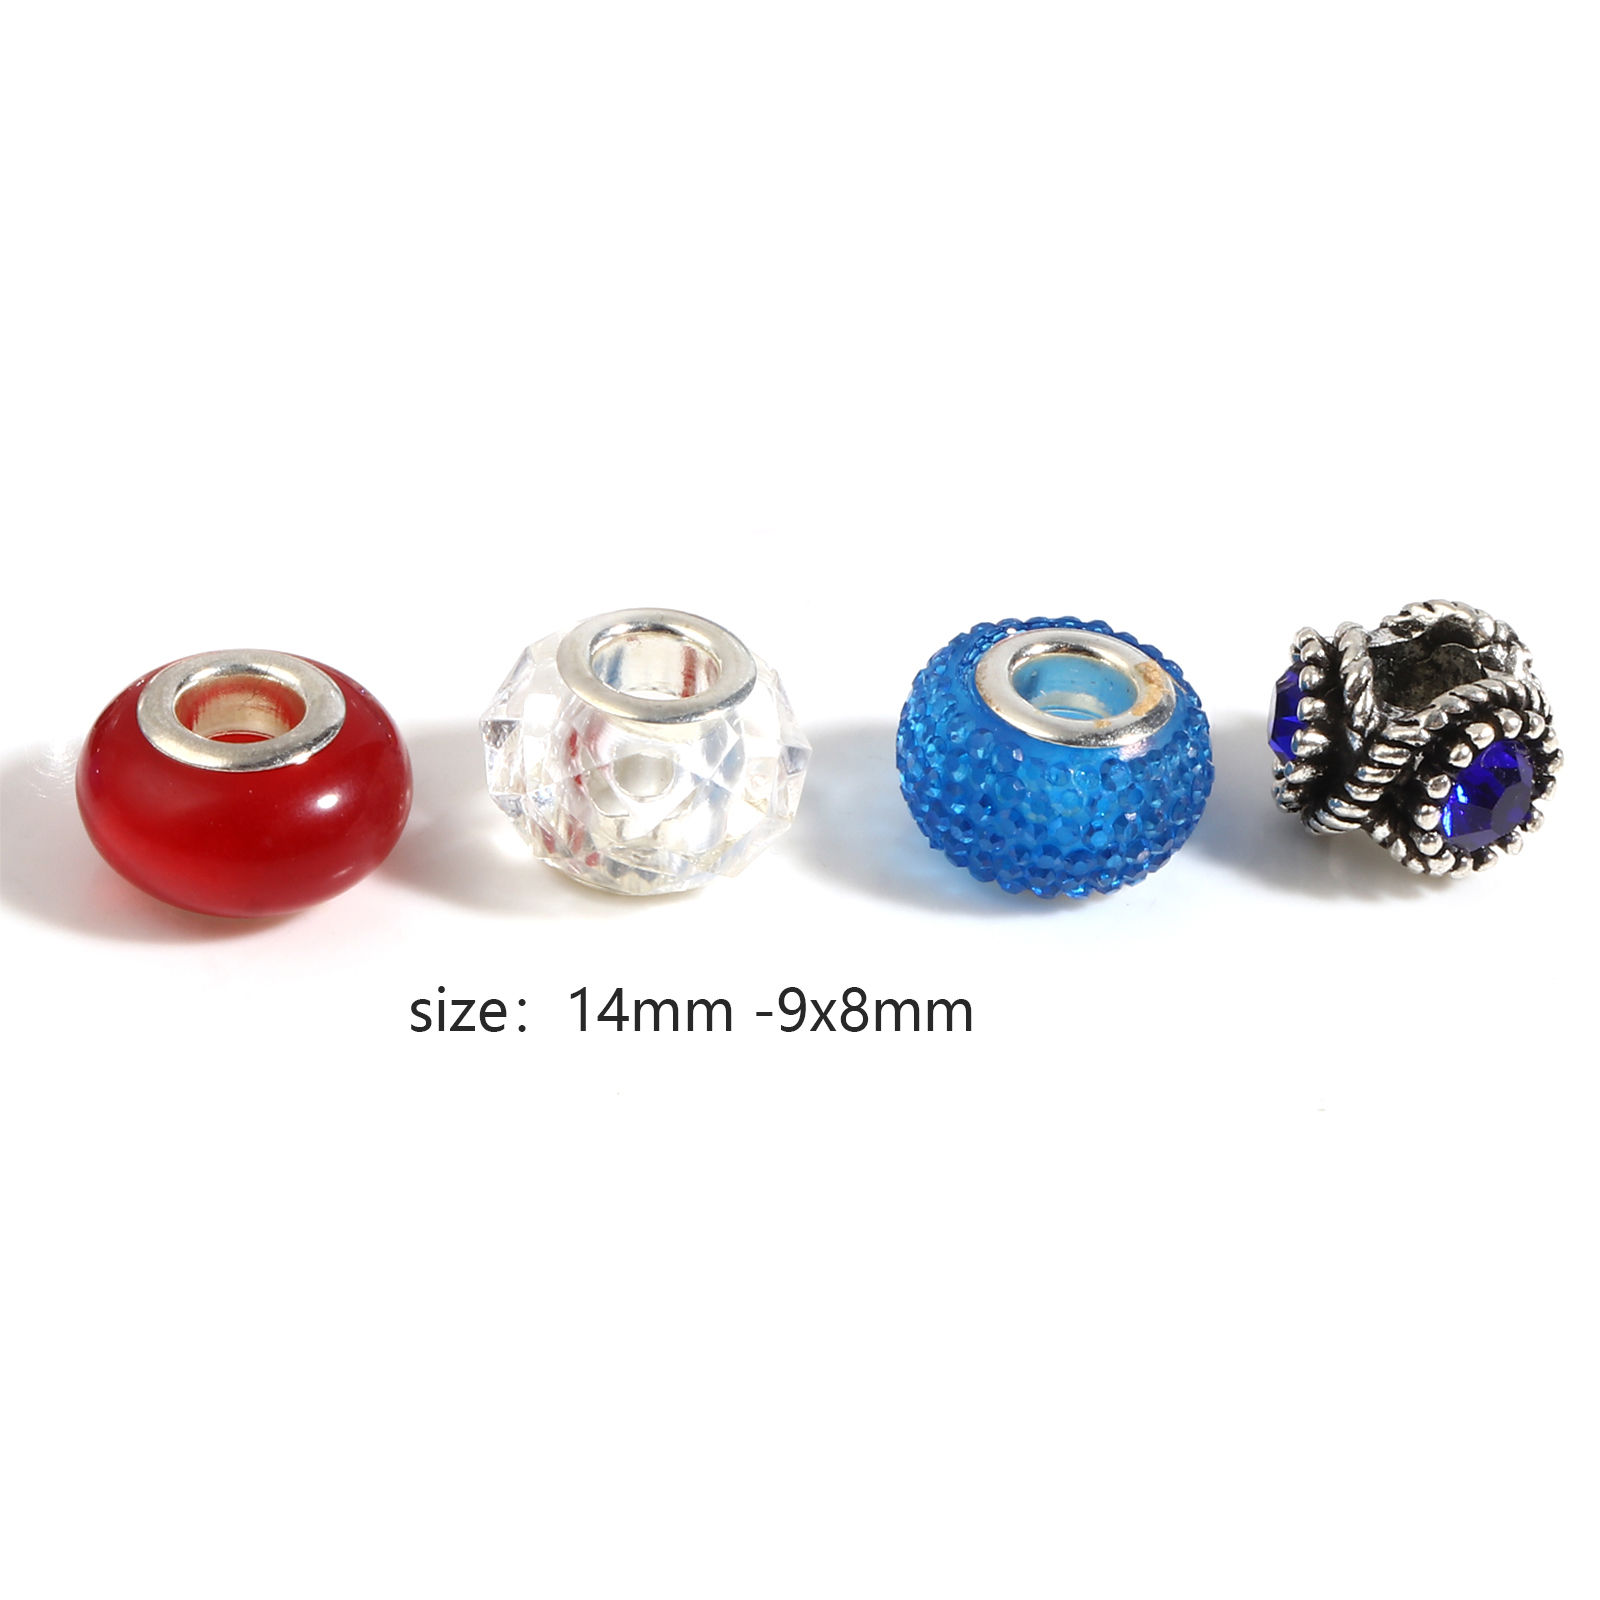 Picture of Zinc Based Alloy & Acrylic Large Hole Charm Beads Silver Tone Multicolor Round At Random 14mm Dia., 9mm x 8mm, Hole: Approx 5.1mm - 4.5mm, 1 Set